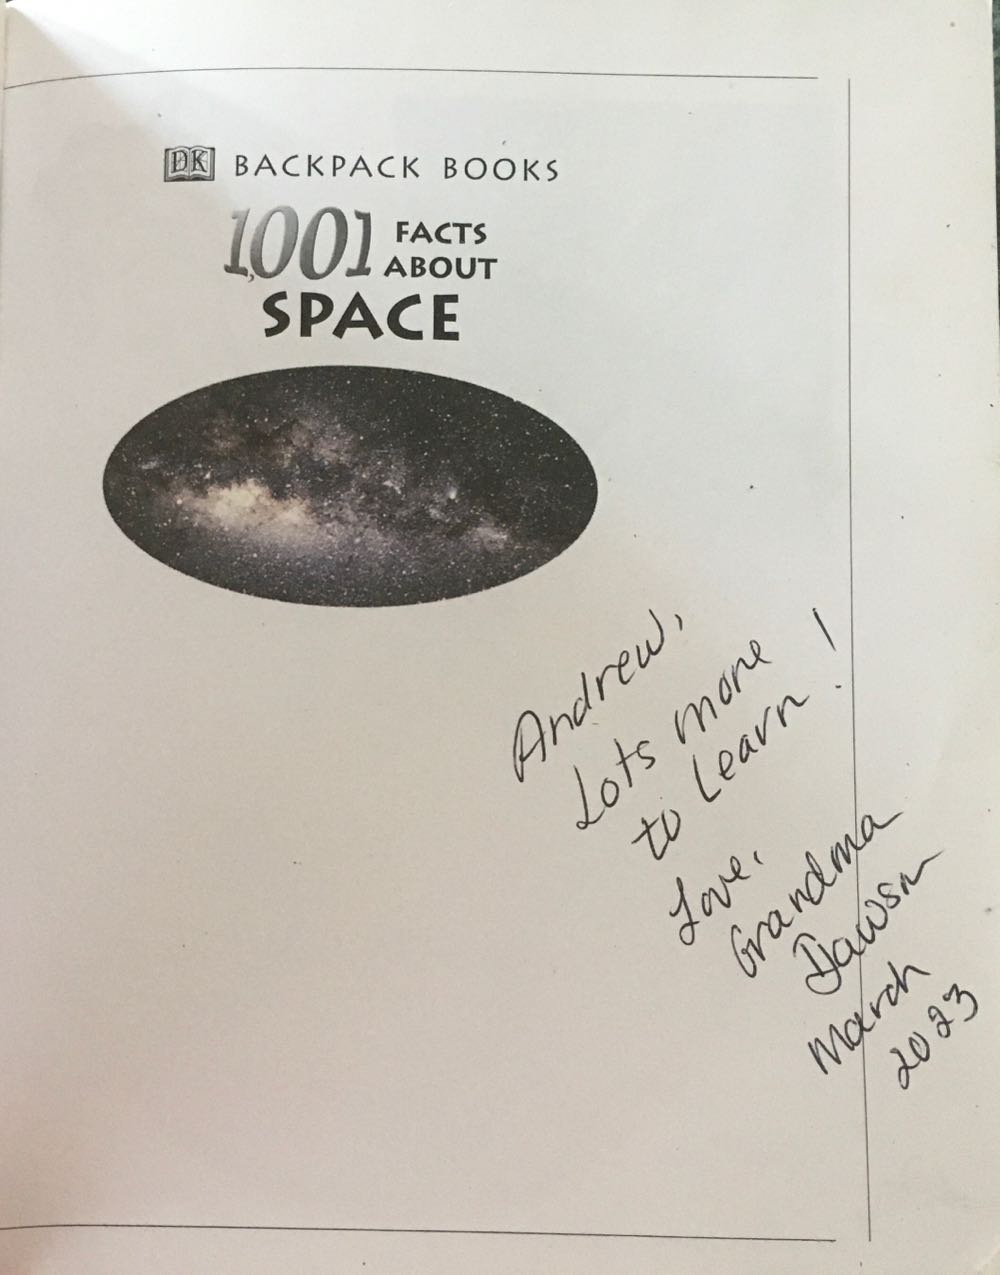 1,001 Facts About Space - Carole Stott (Dk Pub) book collectible [Barcode 9780789484505] - Main Image 3